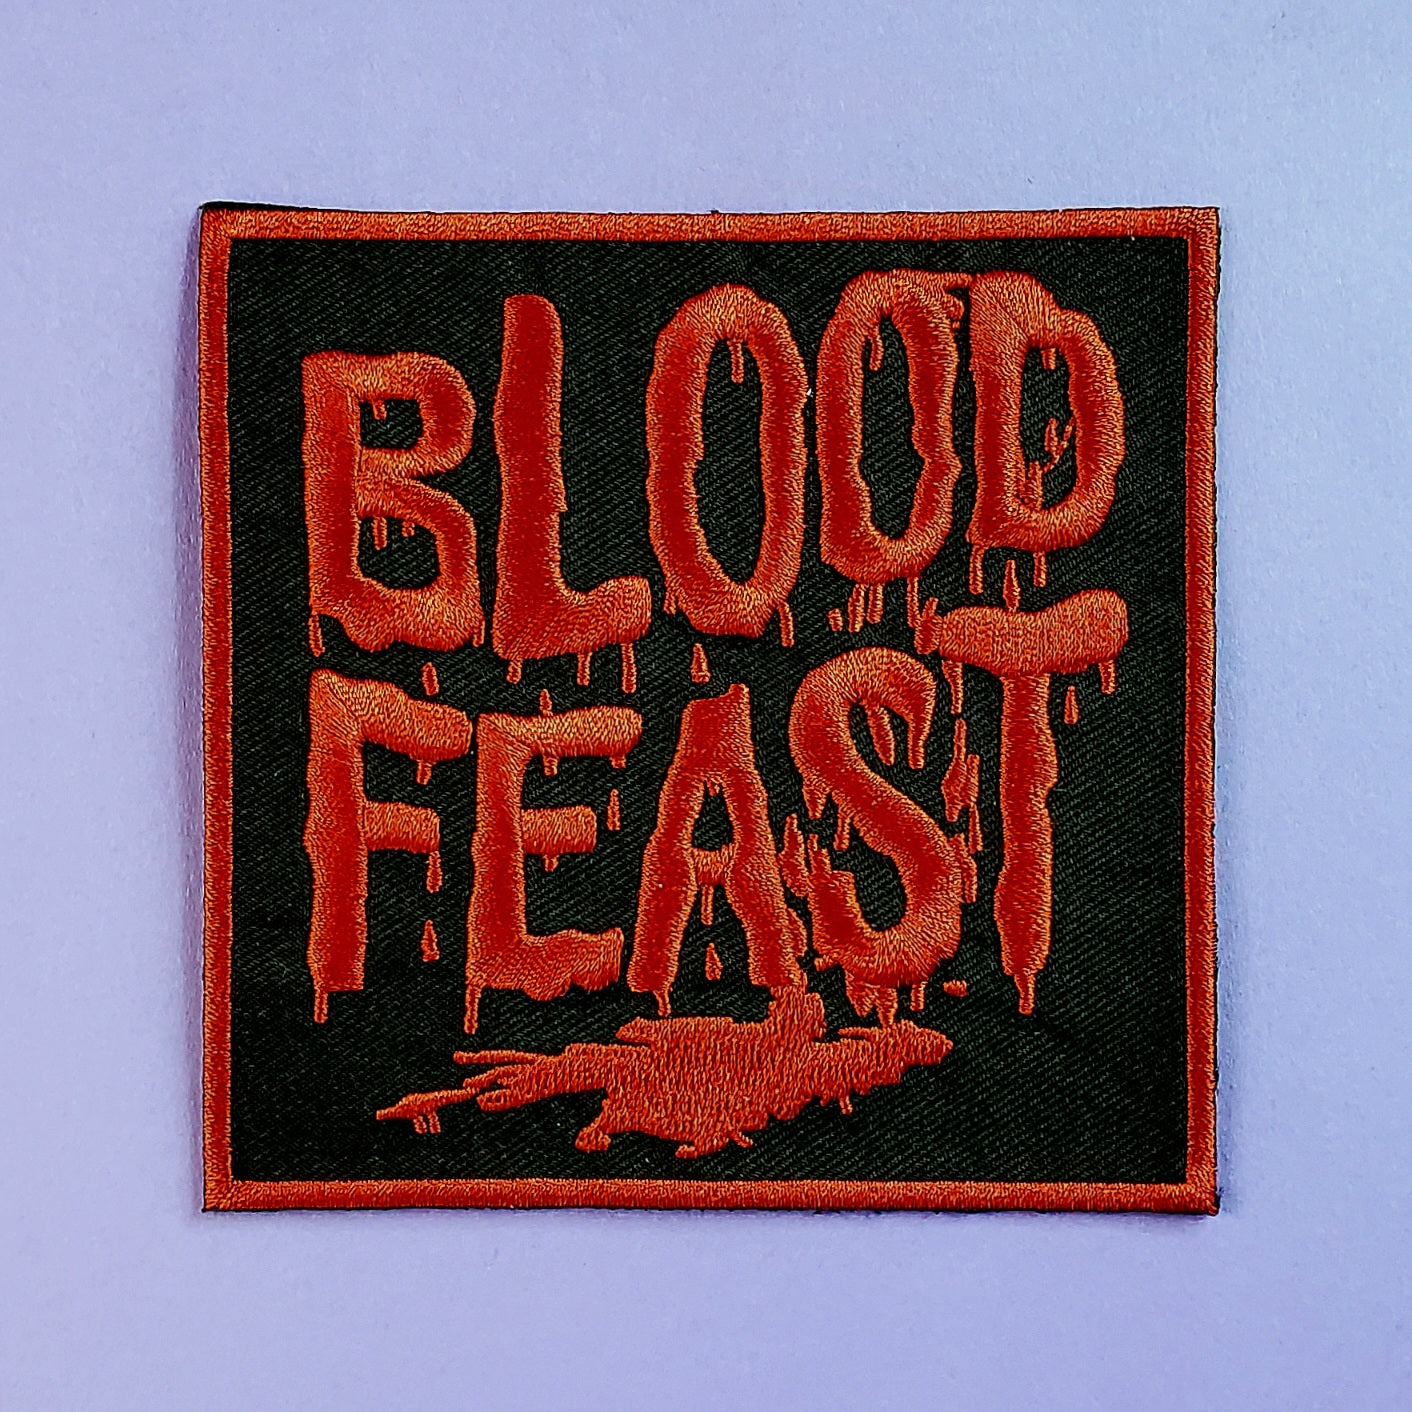 square embroidered patch featuring the red drippy blood style font logo of the 1963 film Blood Feast. On a black background with a red border 